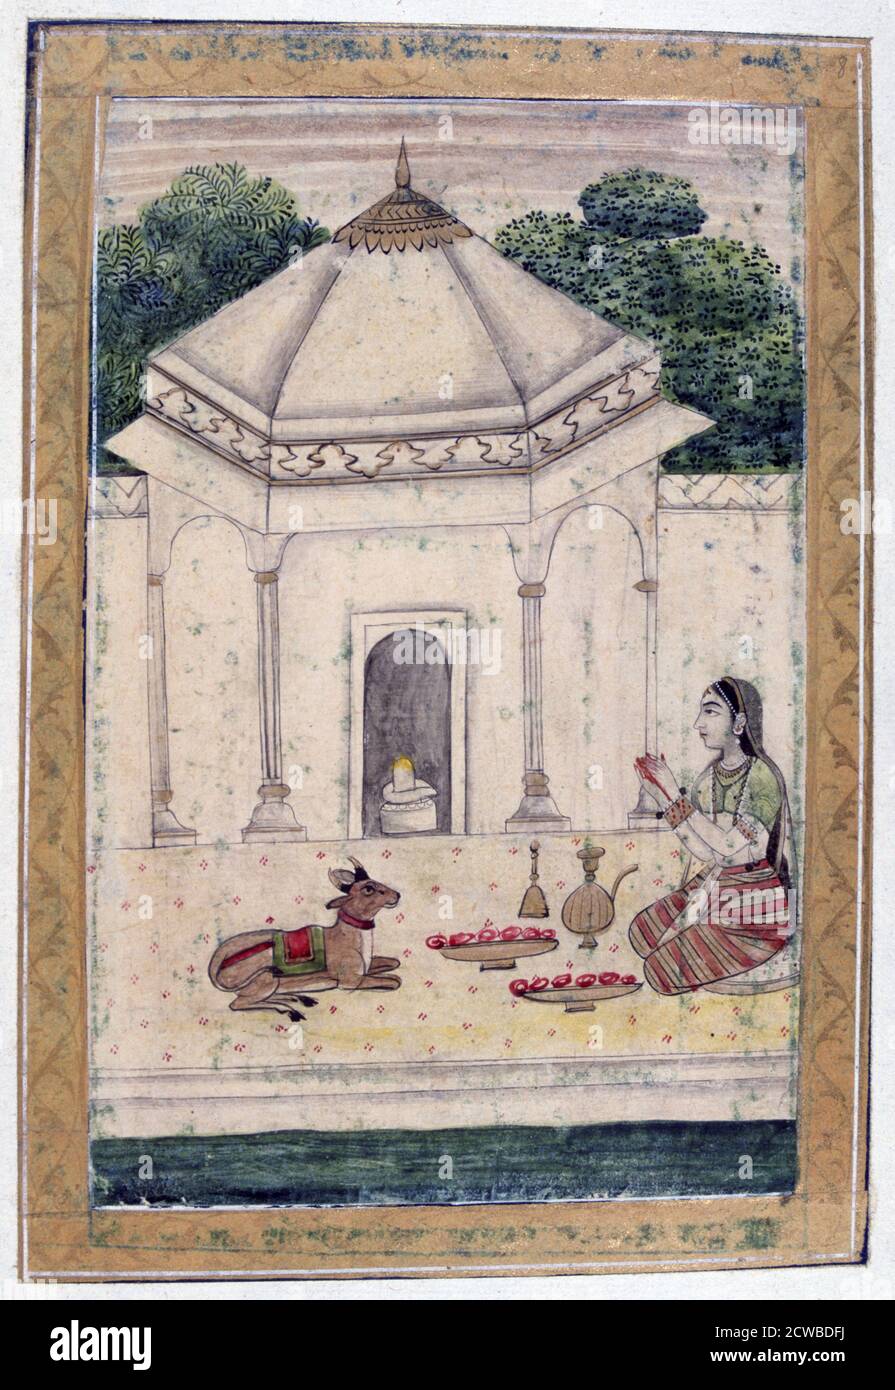 Bhairavi Ragini, Ragamala Album, School of Rajasthan, 19th century. Worship of the lingam of Shiva by a young woman. The Lingam (also, Linga, meaning mark, or sign,) is a symbol for the worship of the Hindu god Shiva. Found in the collection of Jean Claude Carriere. The artist is unknown. Stock Photo